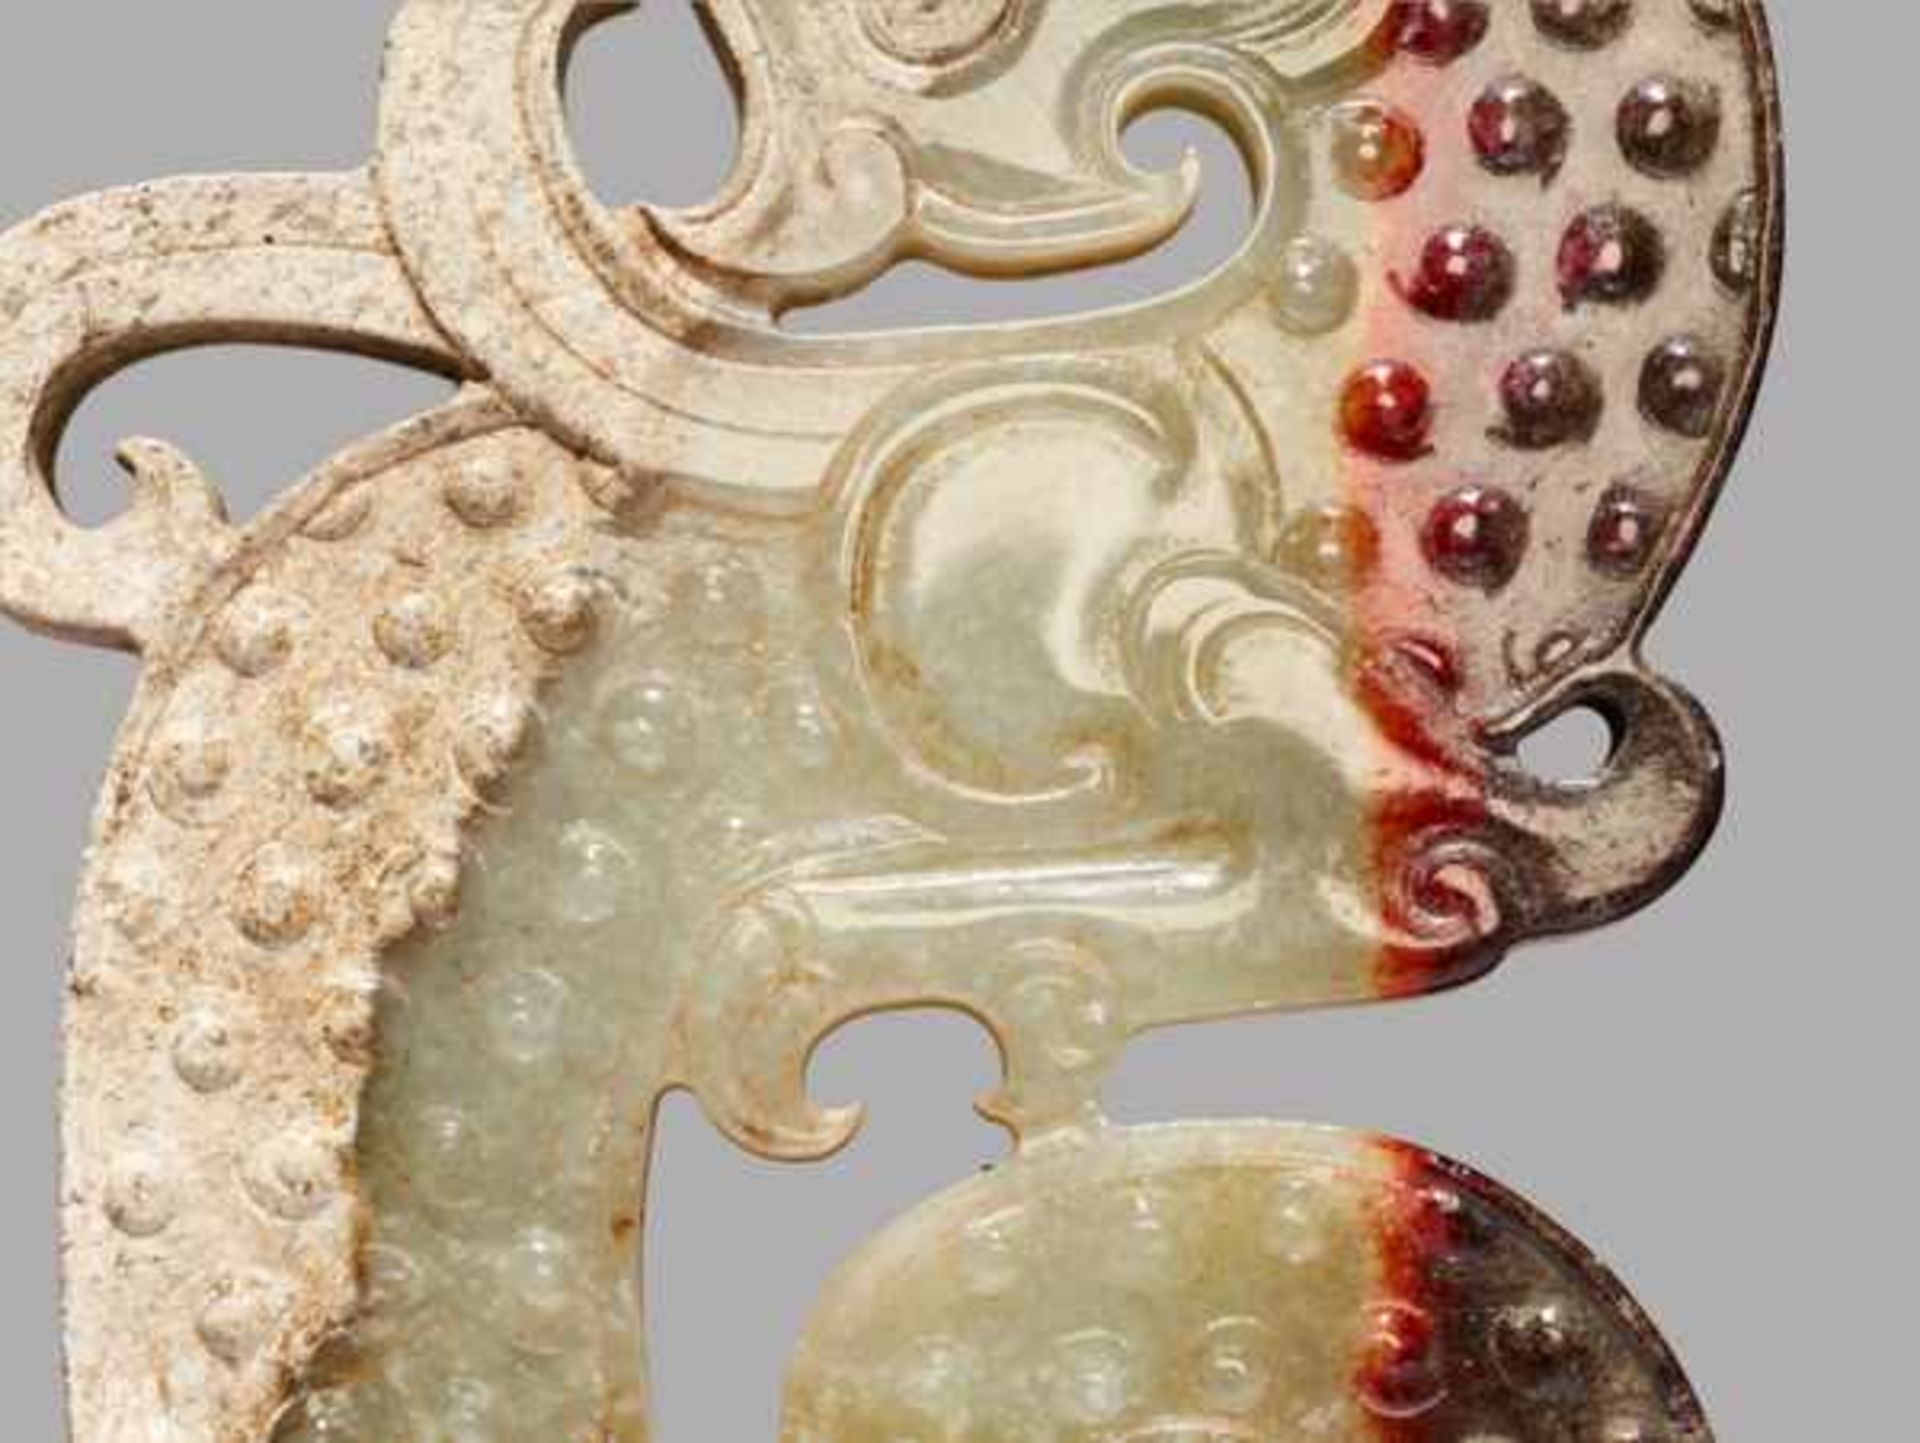 A STRIKING KUI S-SHAPED DRAGON IN WHITE JADE WITH A BROWN STRIPE Jade, China. Early Western Han - Image 4 of 7